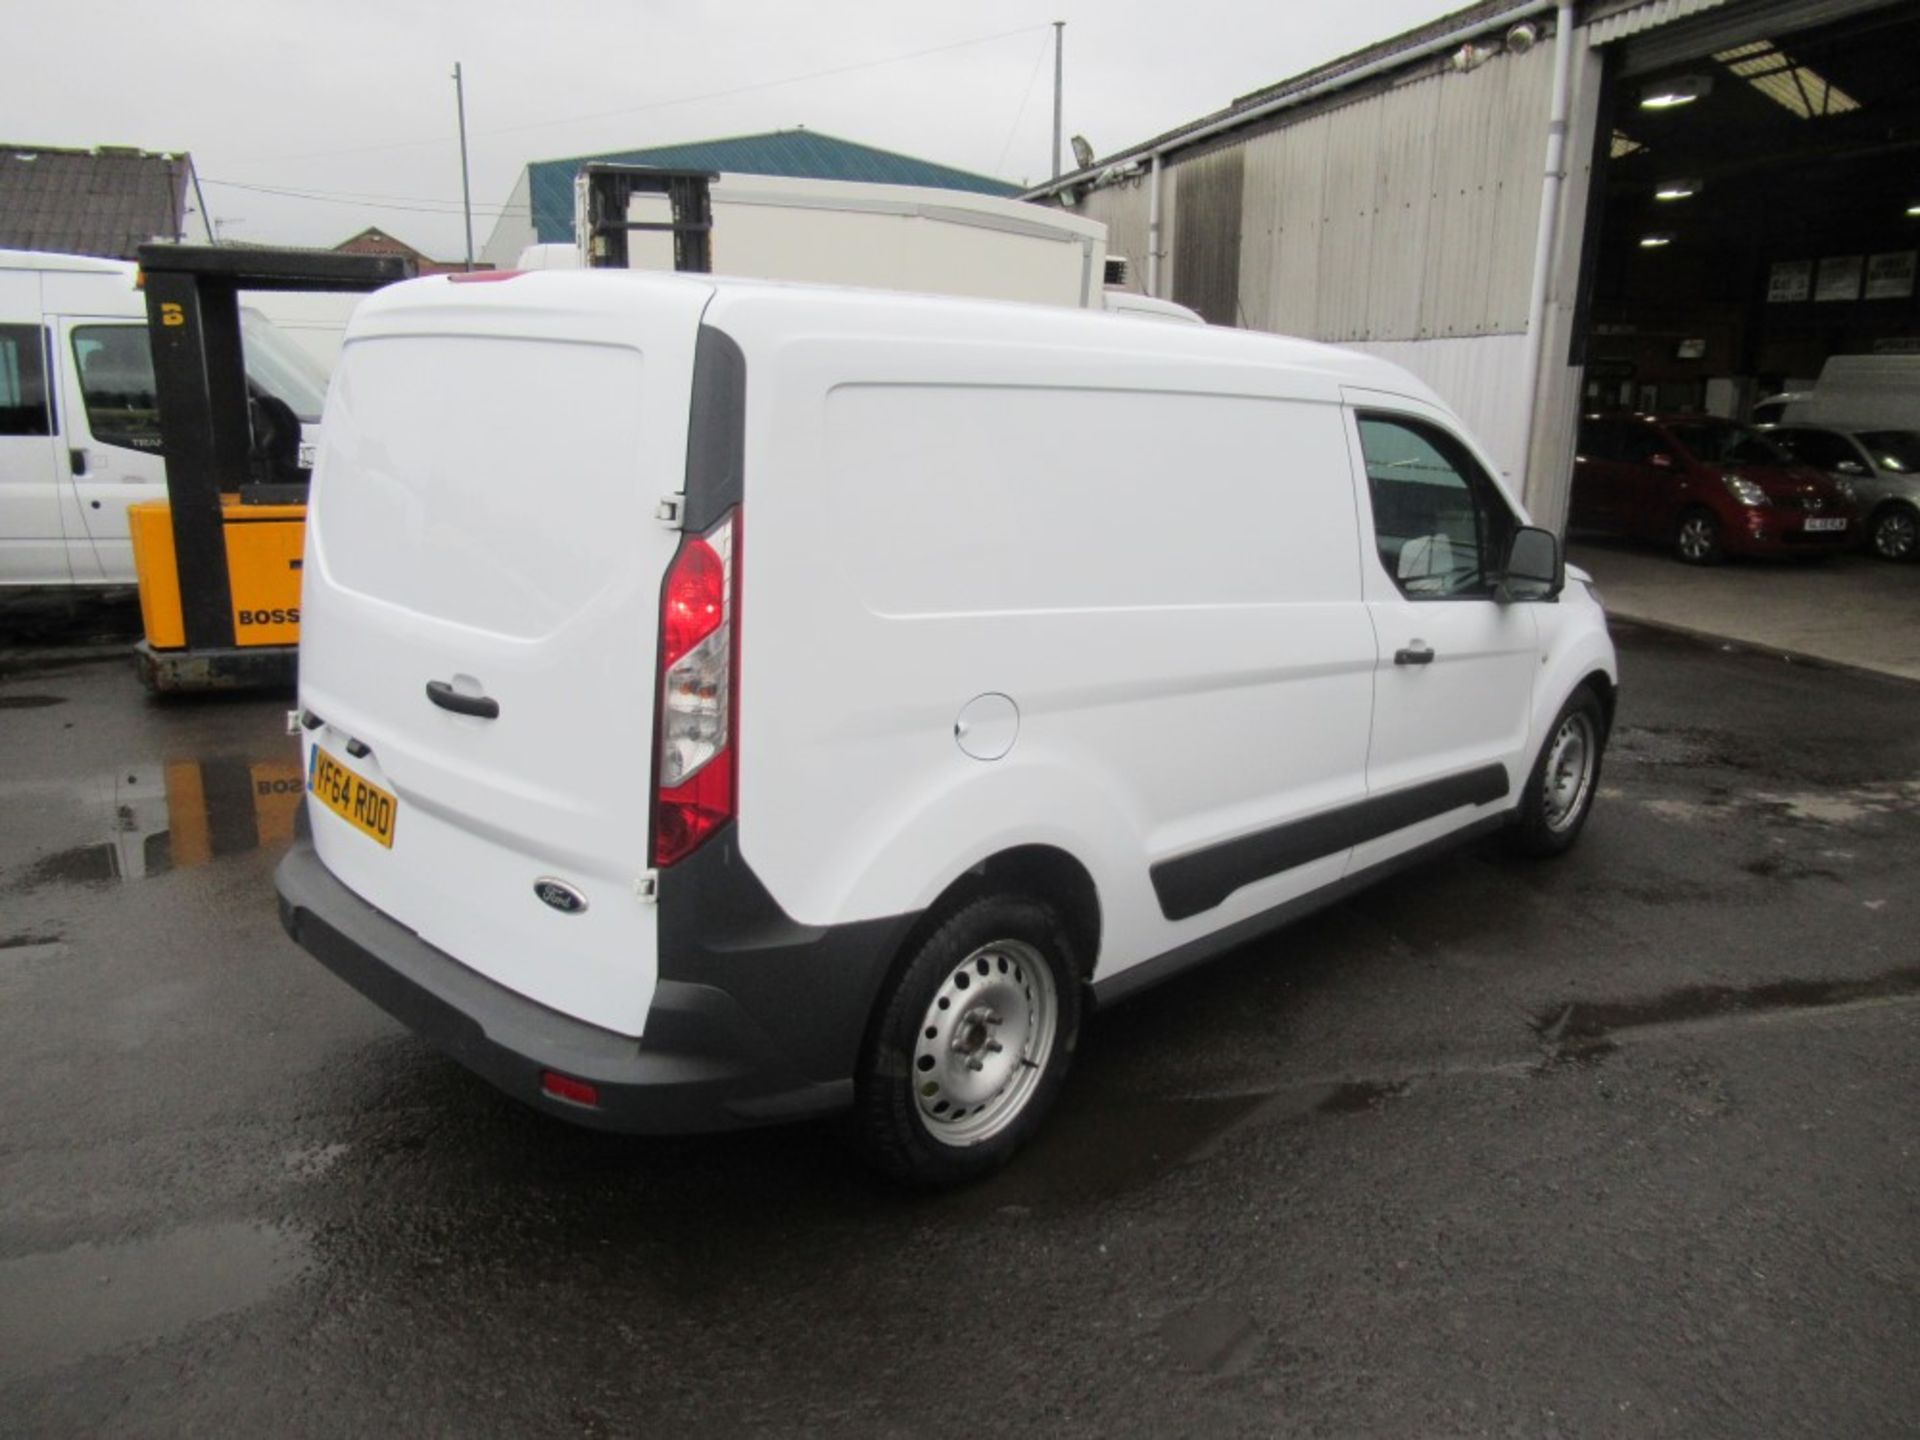 64 reg FORD TRANSIT CONNECT 210 ECO-TECH, 1ST REG 01/15, 108763M WARRANTED, V5 HERE, 1 OWNER FROM - Image 4 of 6